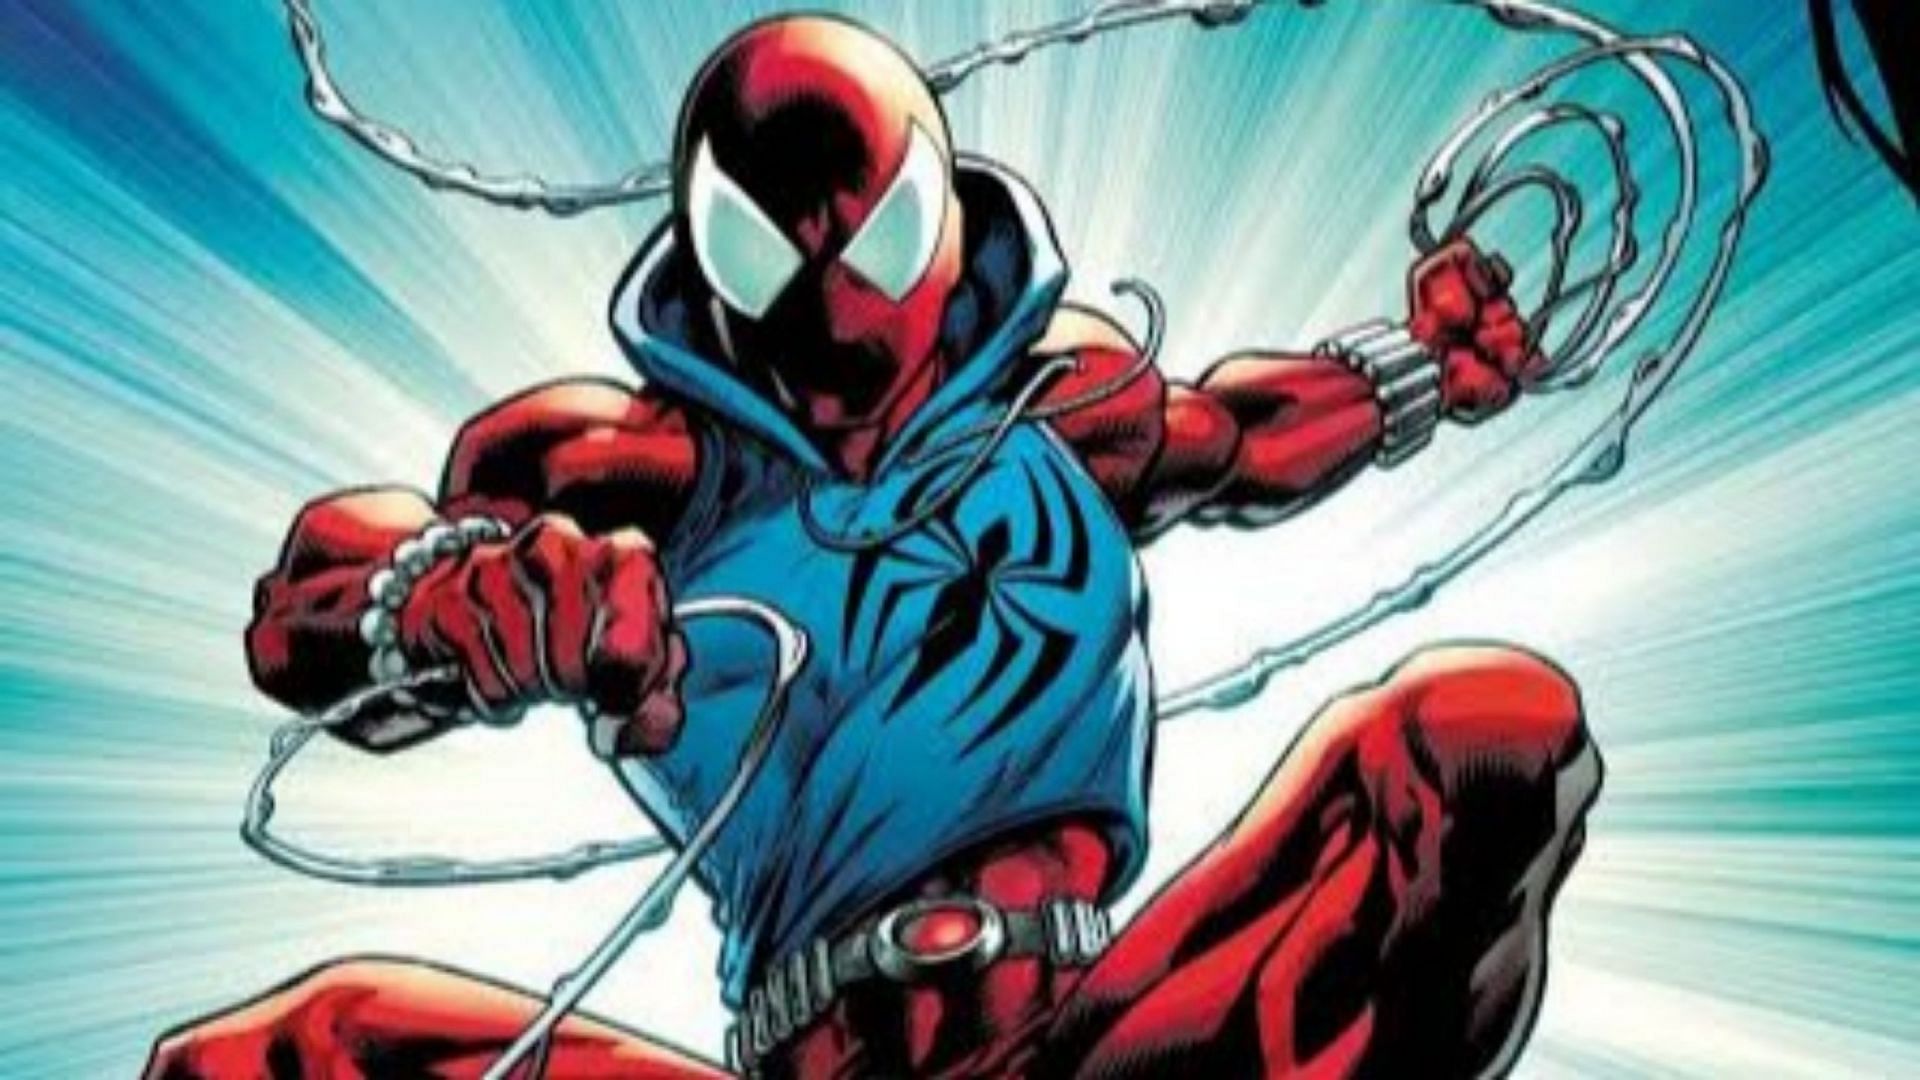 Ben Reilly as the Scarlet Spider (Image via Marvel Comics)